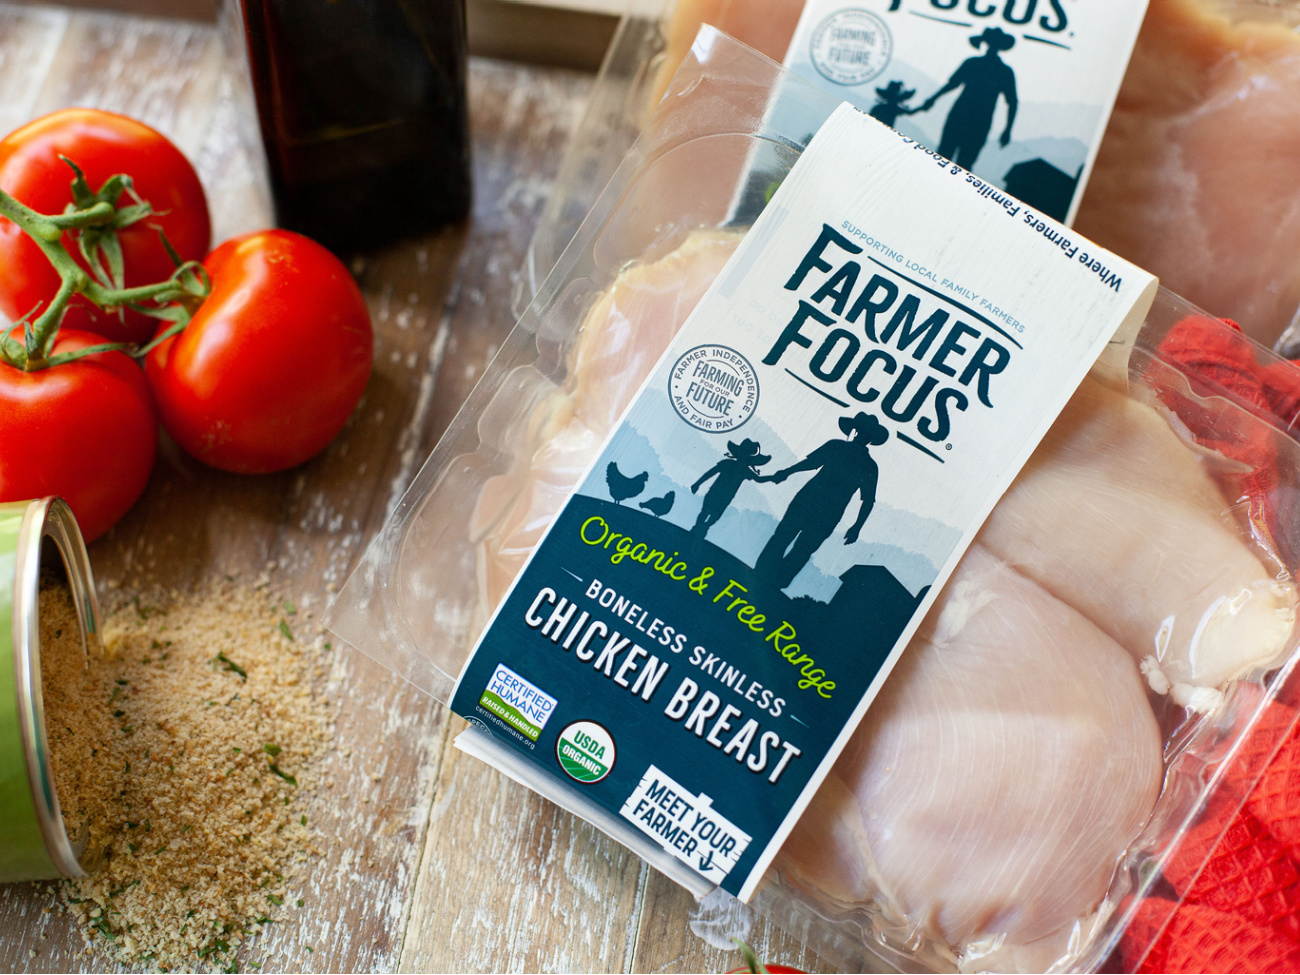 Farmer Focus Boneless Skinless Chicken Breast Is BOGO At Publix – Get Ready To Stock Up!